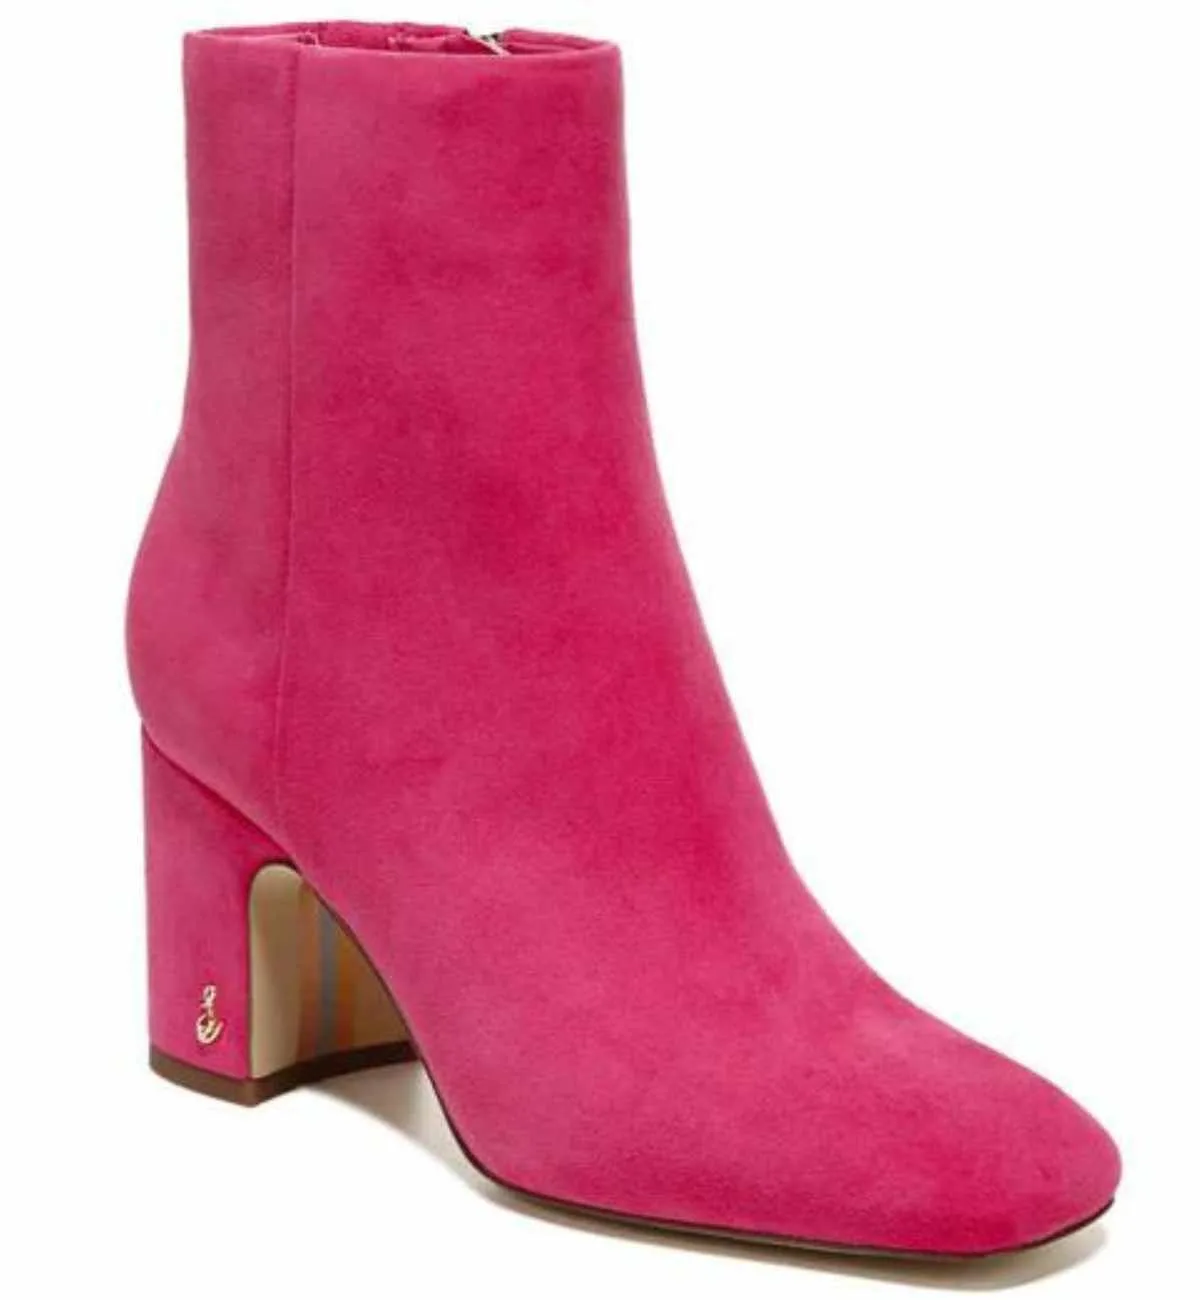 Hot Pink Barbie Core Fashion suede ankle Bootie on white background.